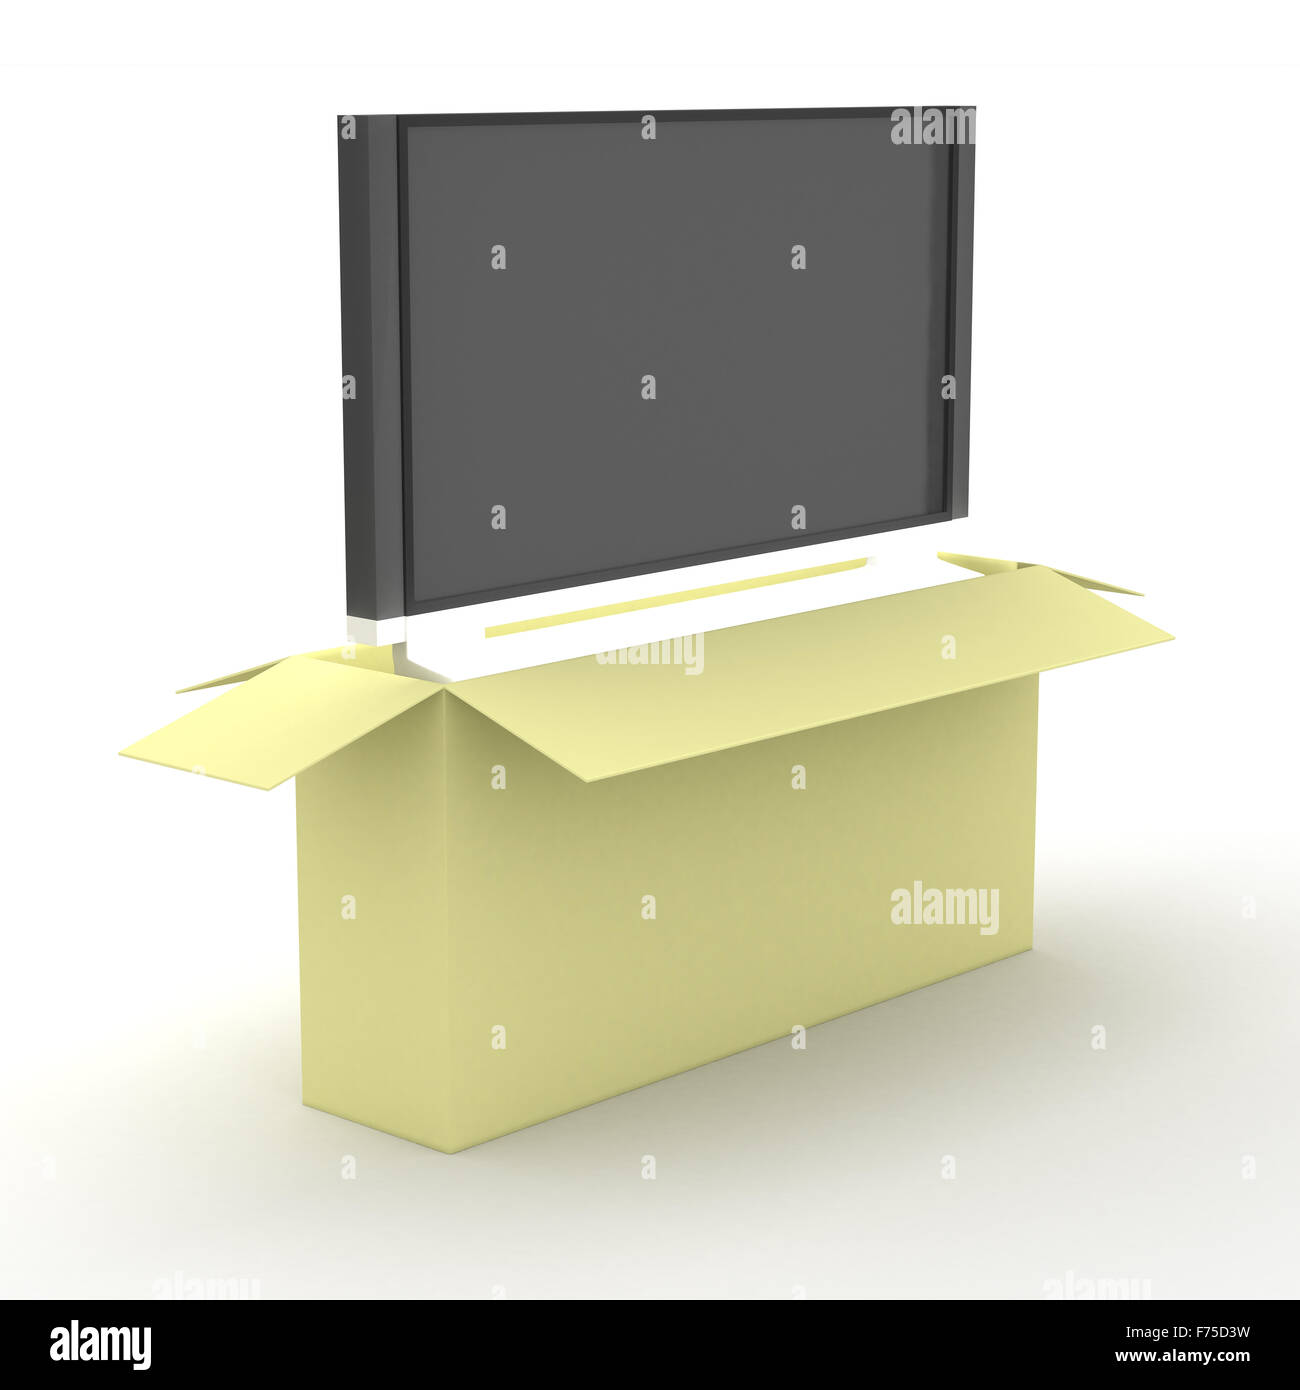 TV in a packing box. 3D image. Stock Photo